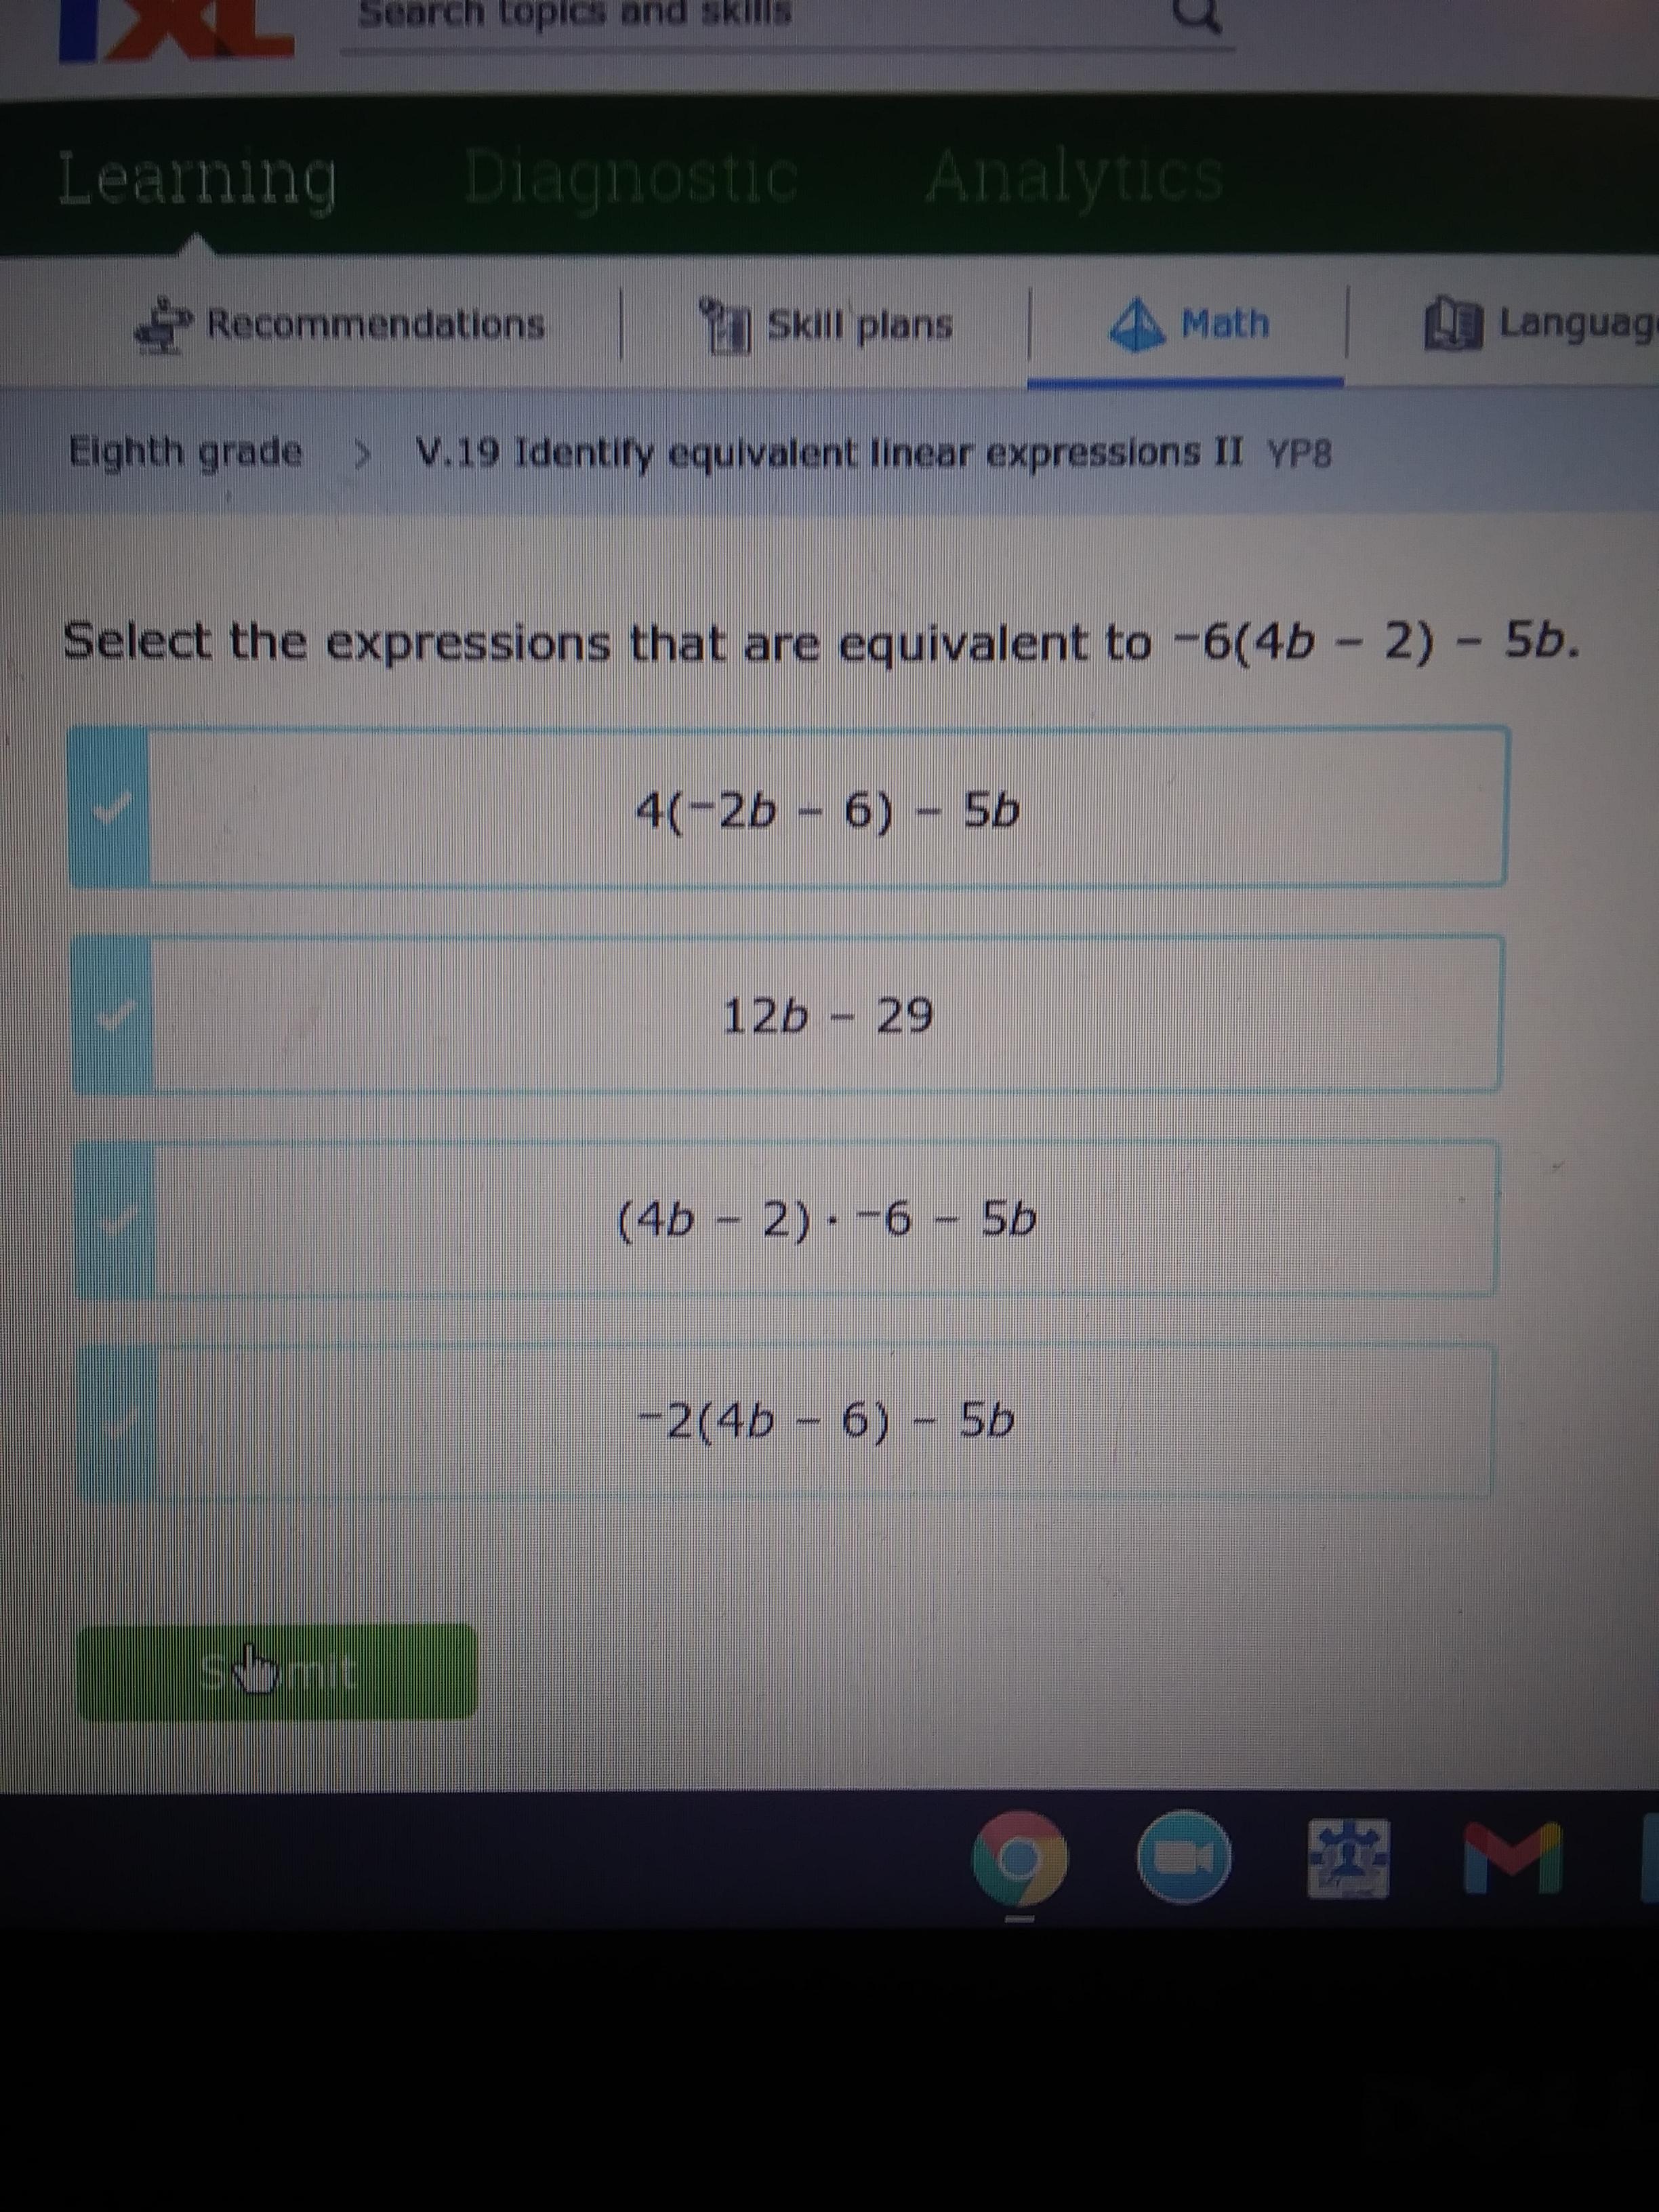 Select The Expressions That Are Equivalent To -6(40 - 2) - 5b. 4(-2b-6) - 5b 12b - 29 (46 - 2) -6 -56